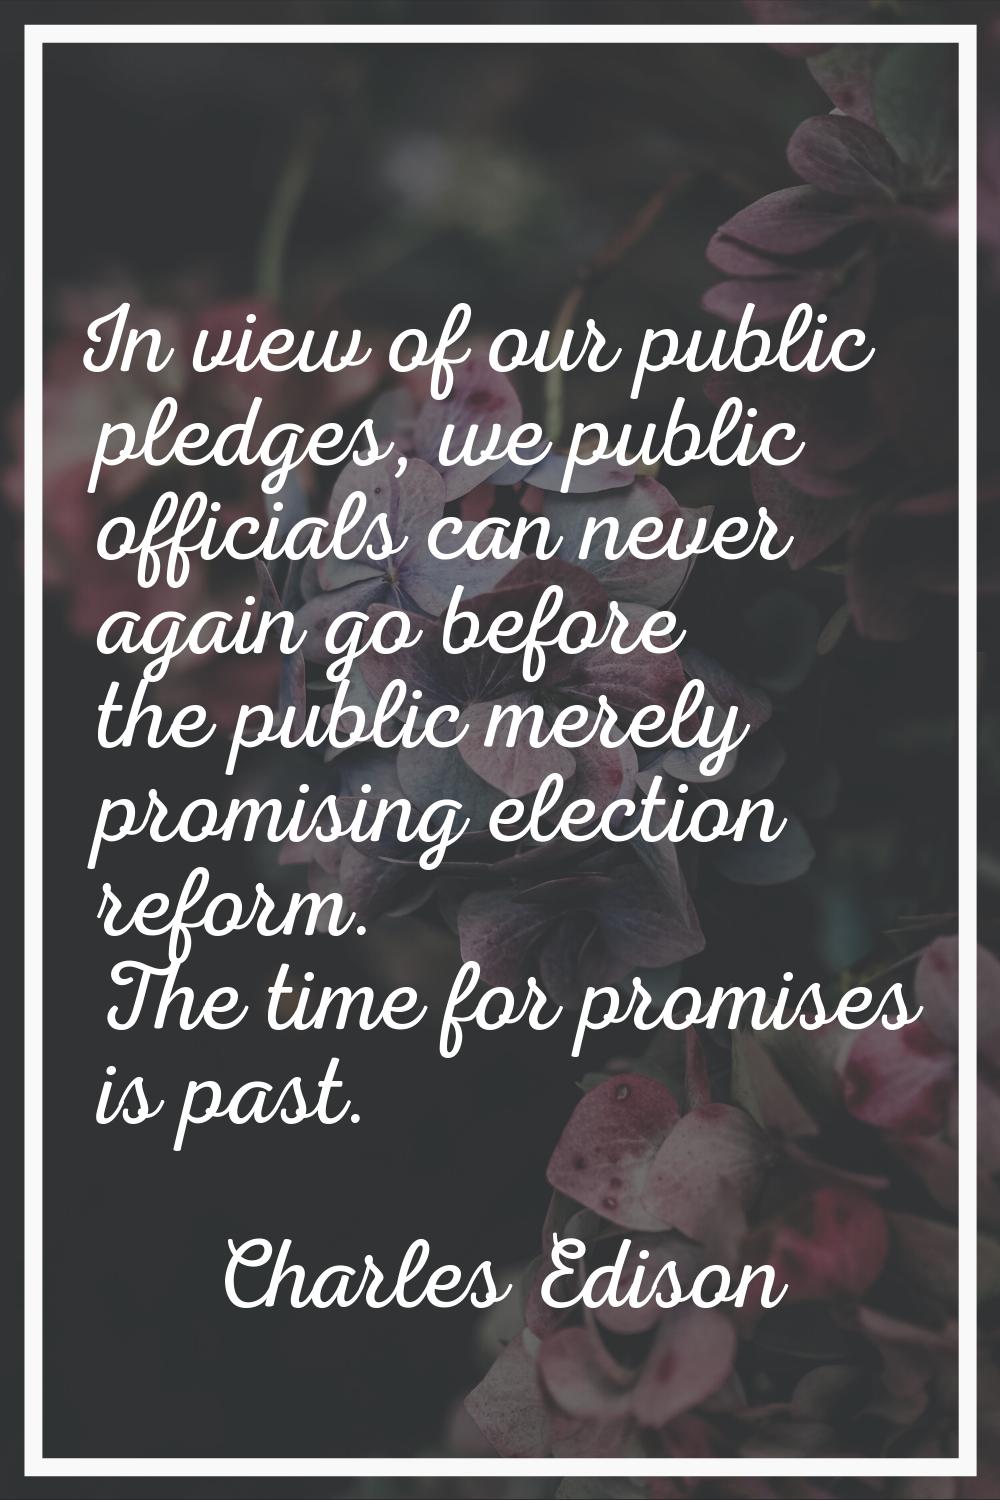 In view of our public pledges, we public officials can never again go before the public merely prom